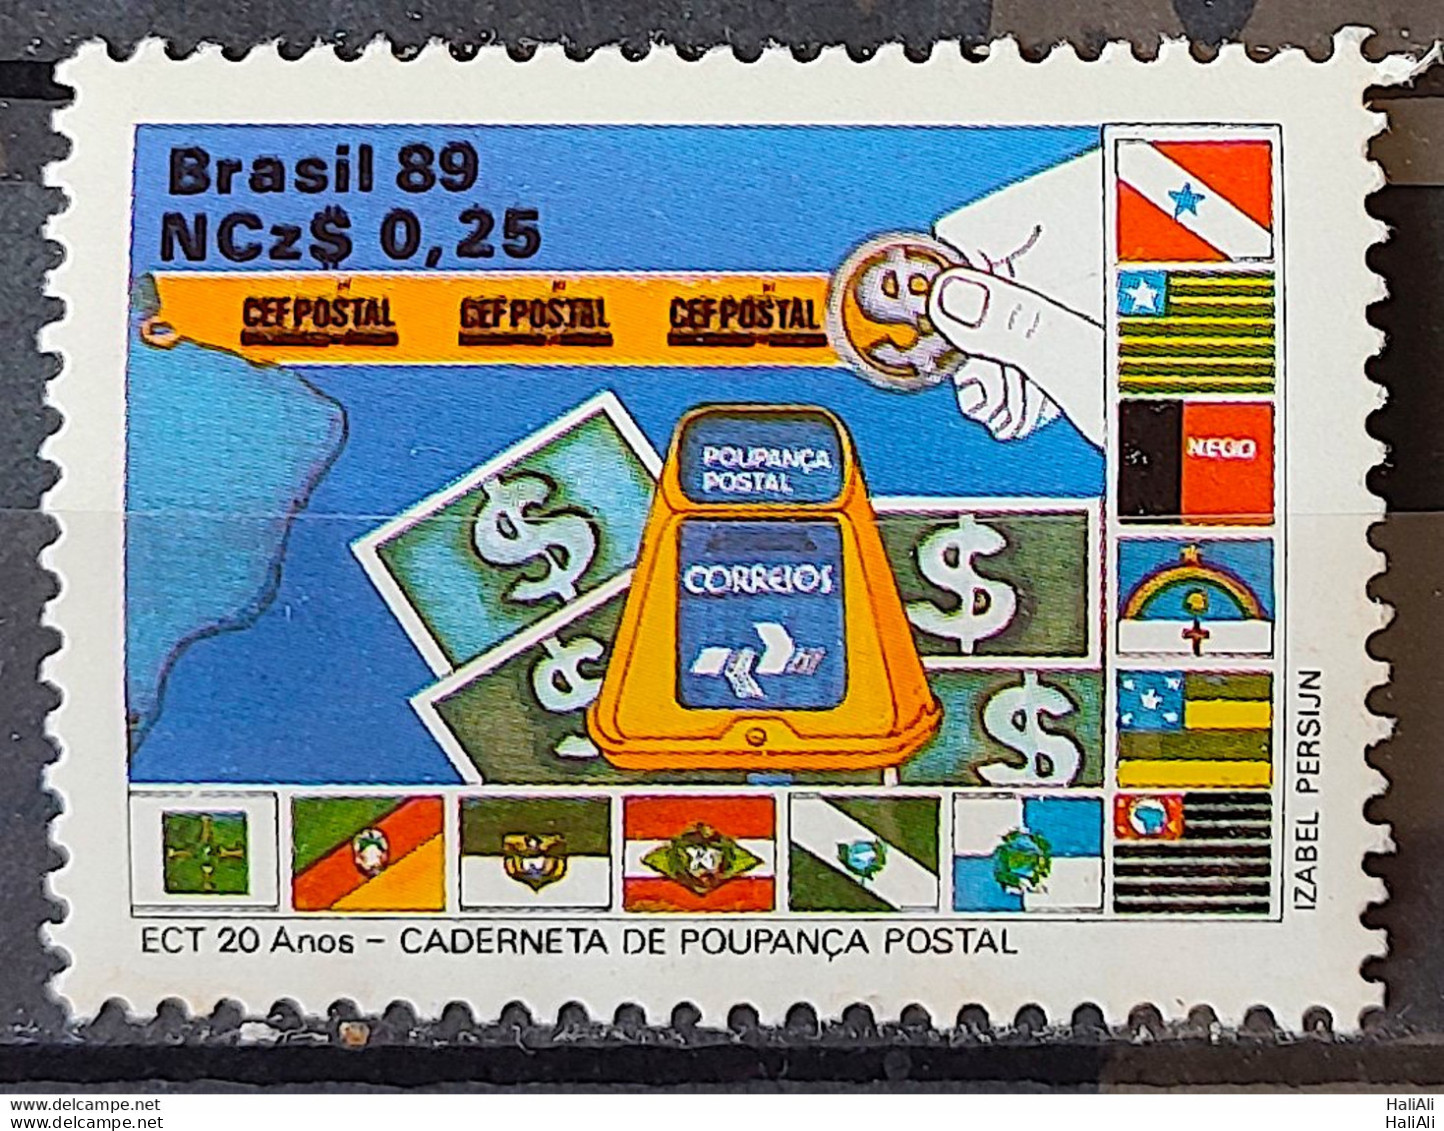 C 1624 Brazil Stamp 23 Years Of ECT Postal Postal Service Flag Collection Box 1989 - Unused Stamps